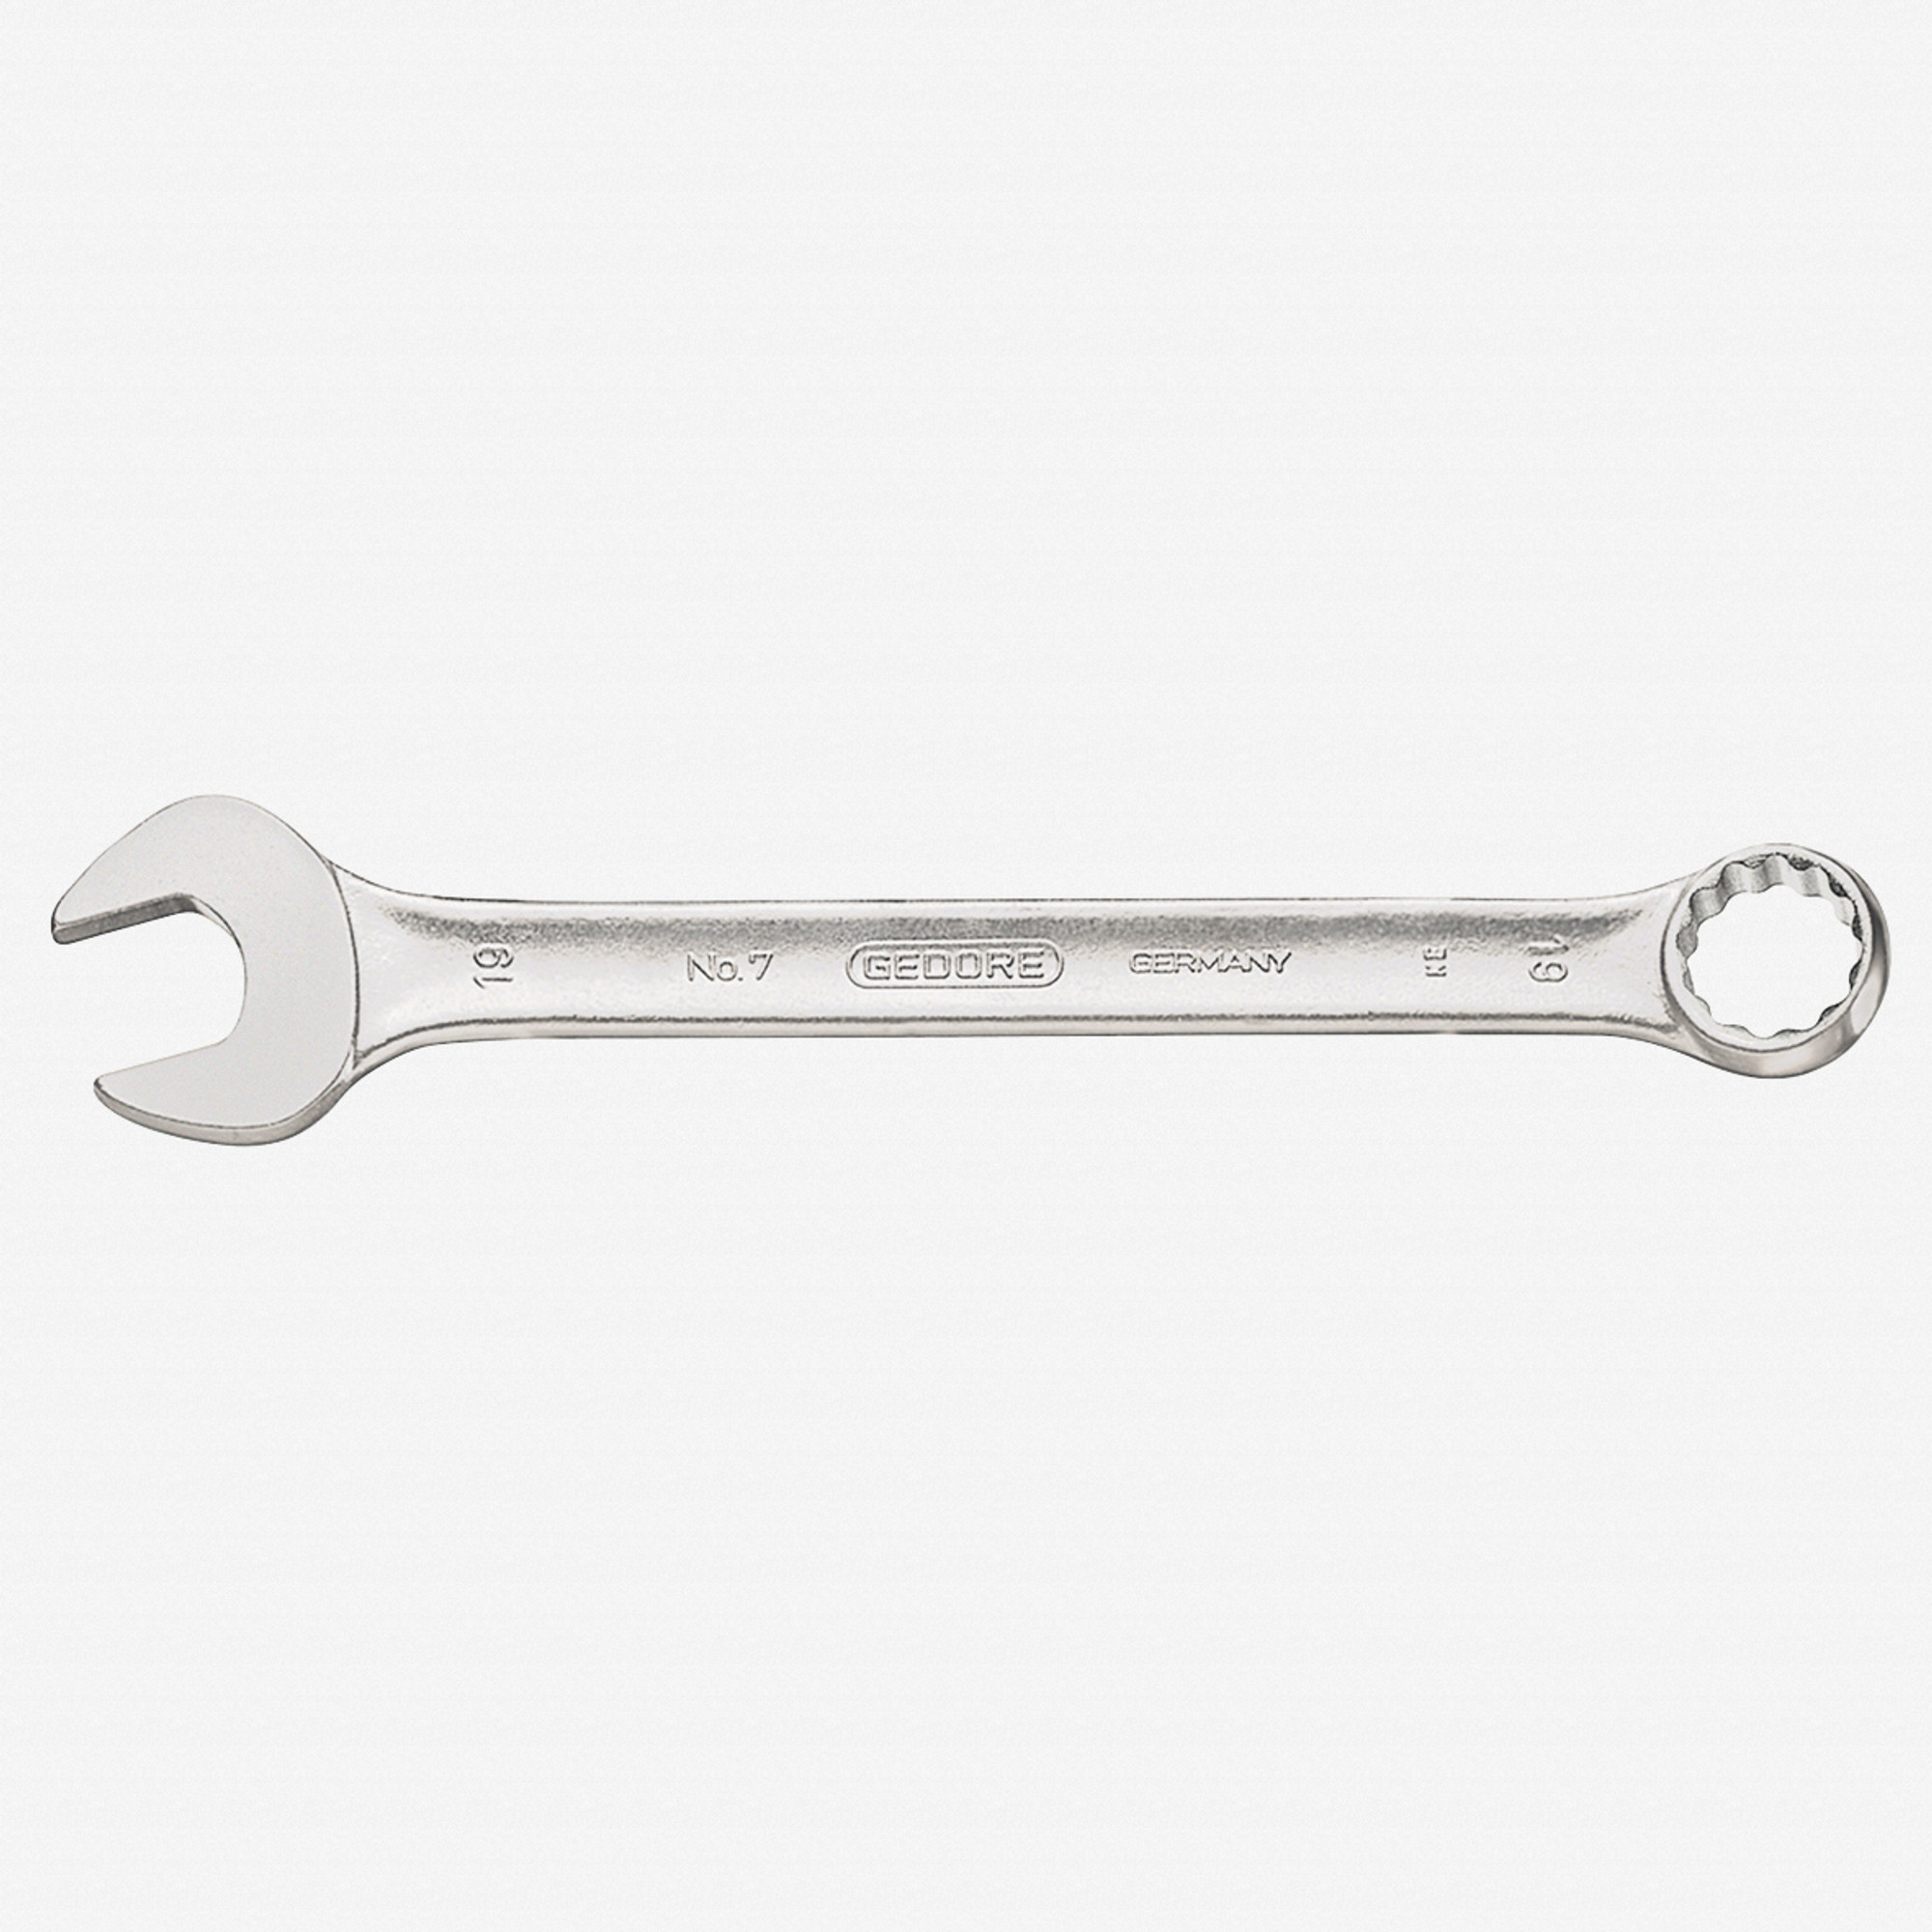 GEDORE 7 UR 13 Reversible Ratchet Wrench,13mm 